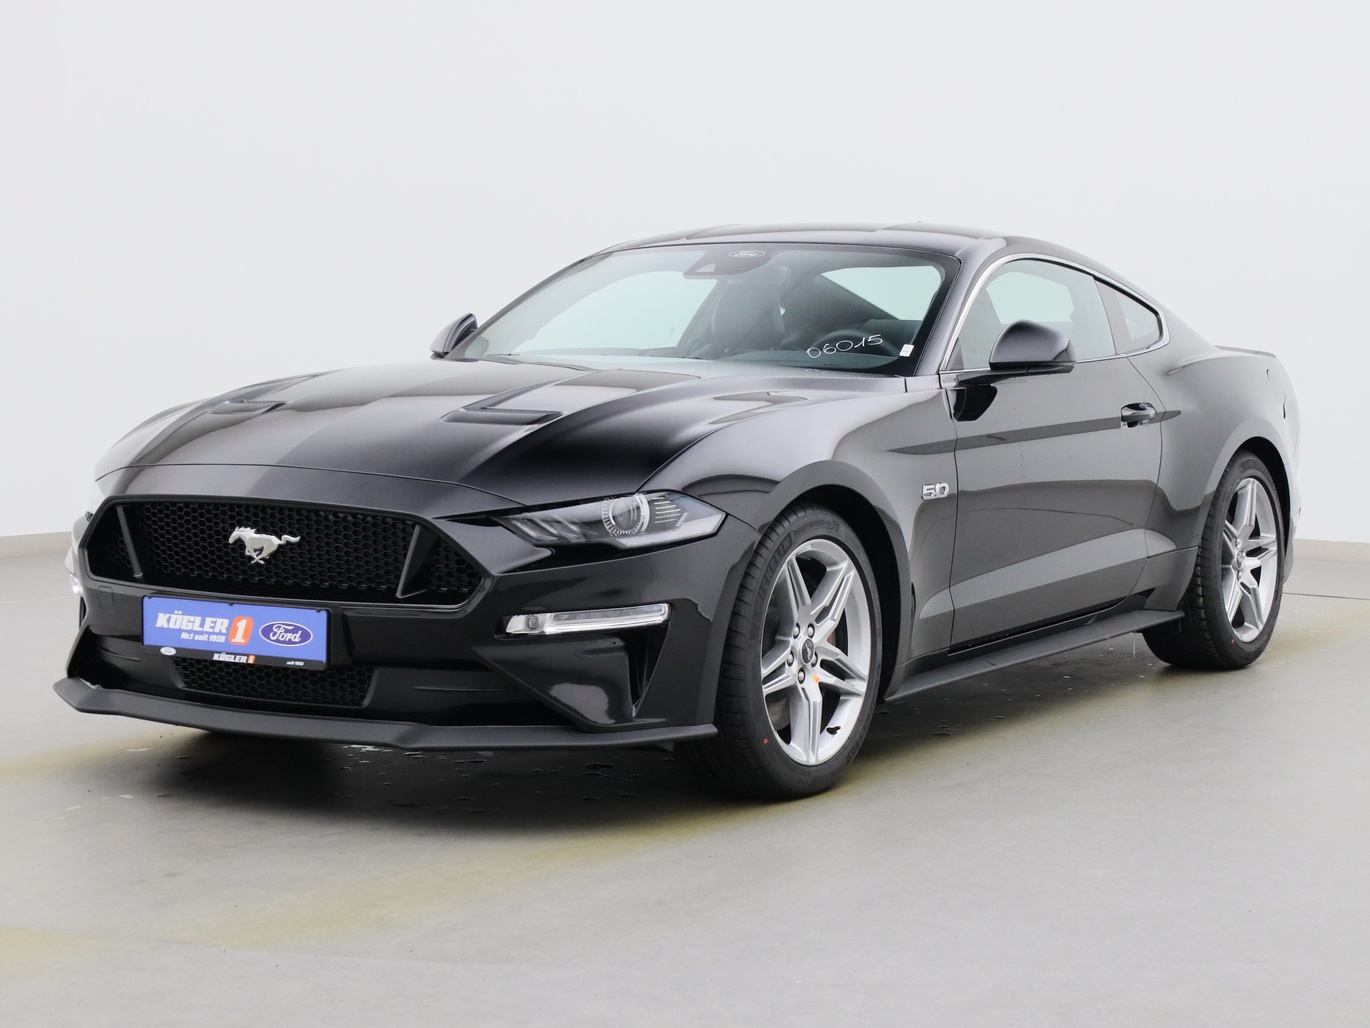  Ford Mustang GT Coupé V8 450PS / Premium 3 / Magne in Iridium Schwarz 